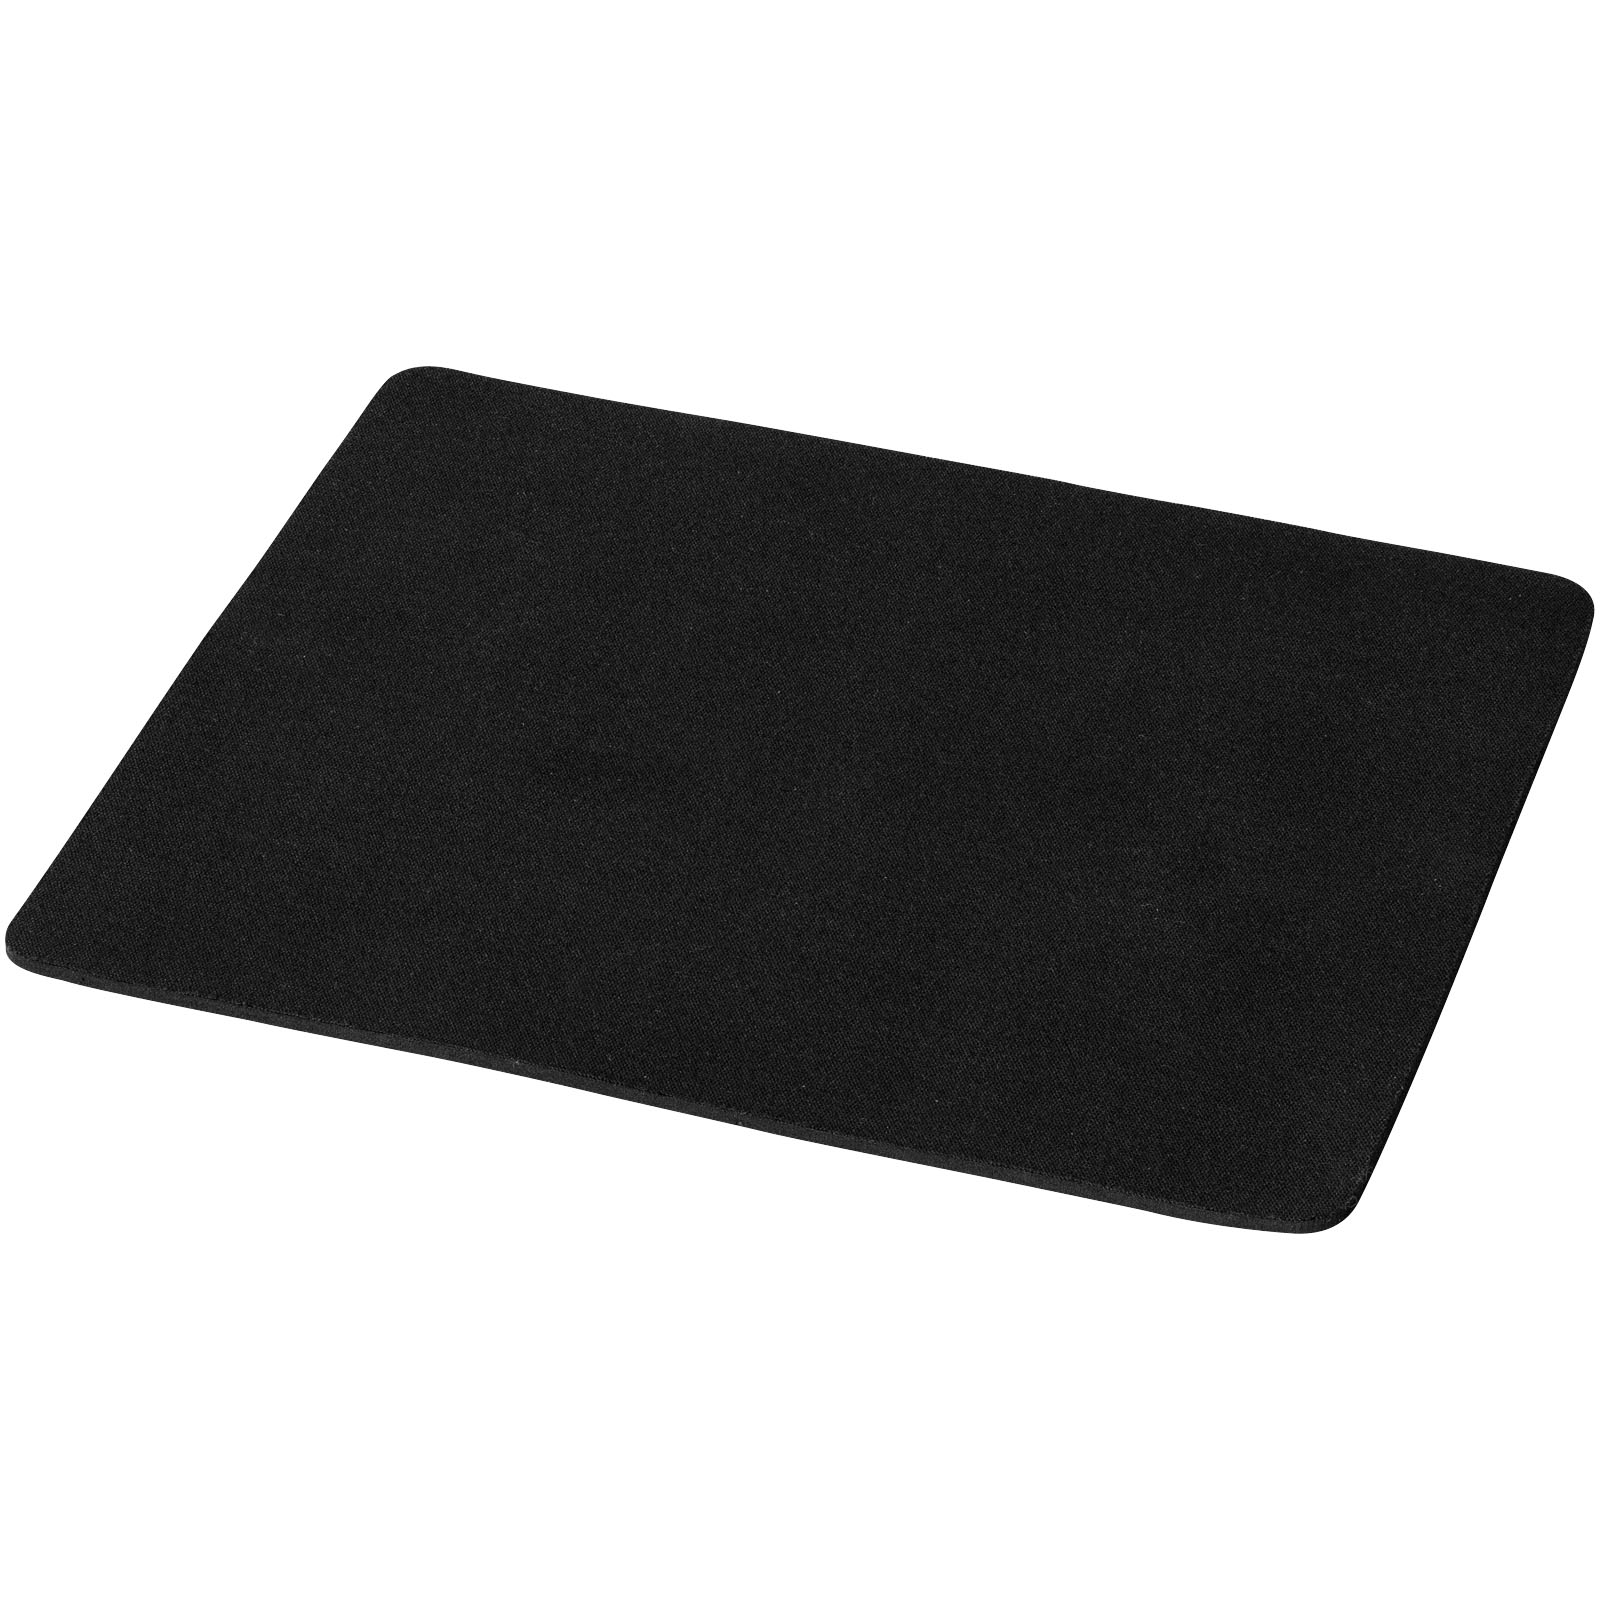 Advertising Desk Accessories - Heli flexible mouse pad - 0